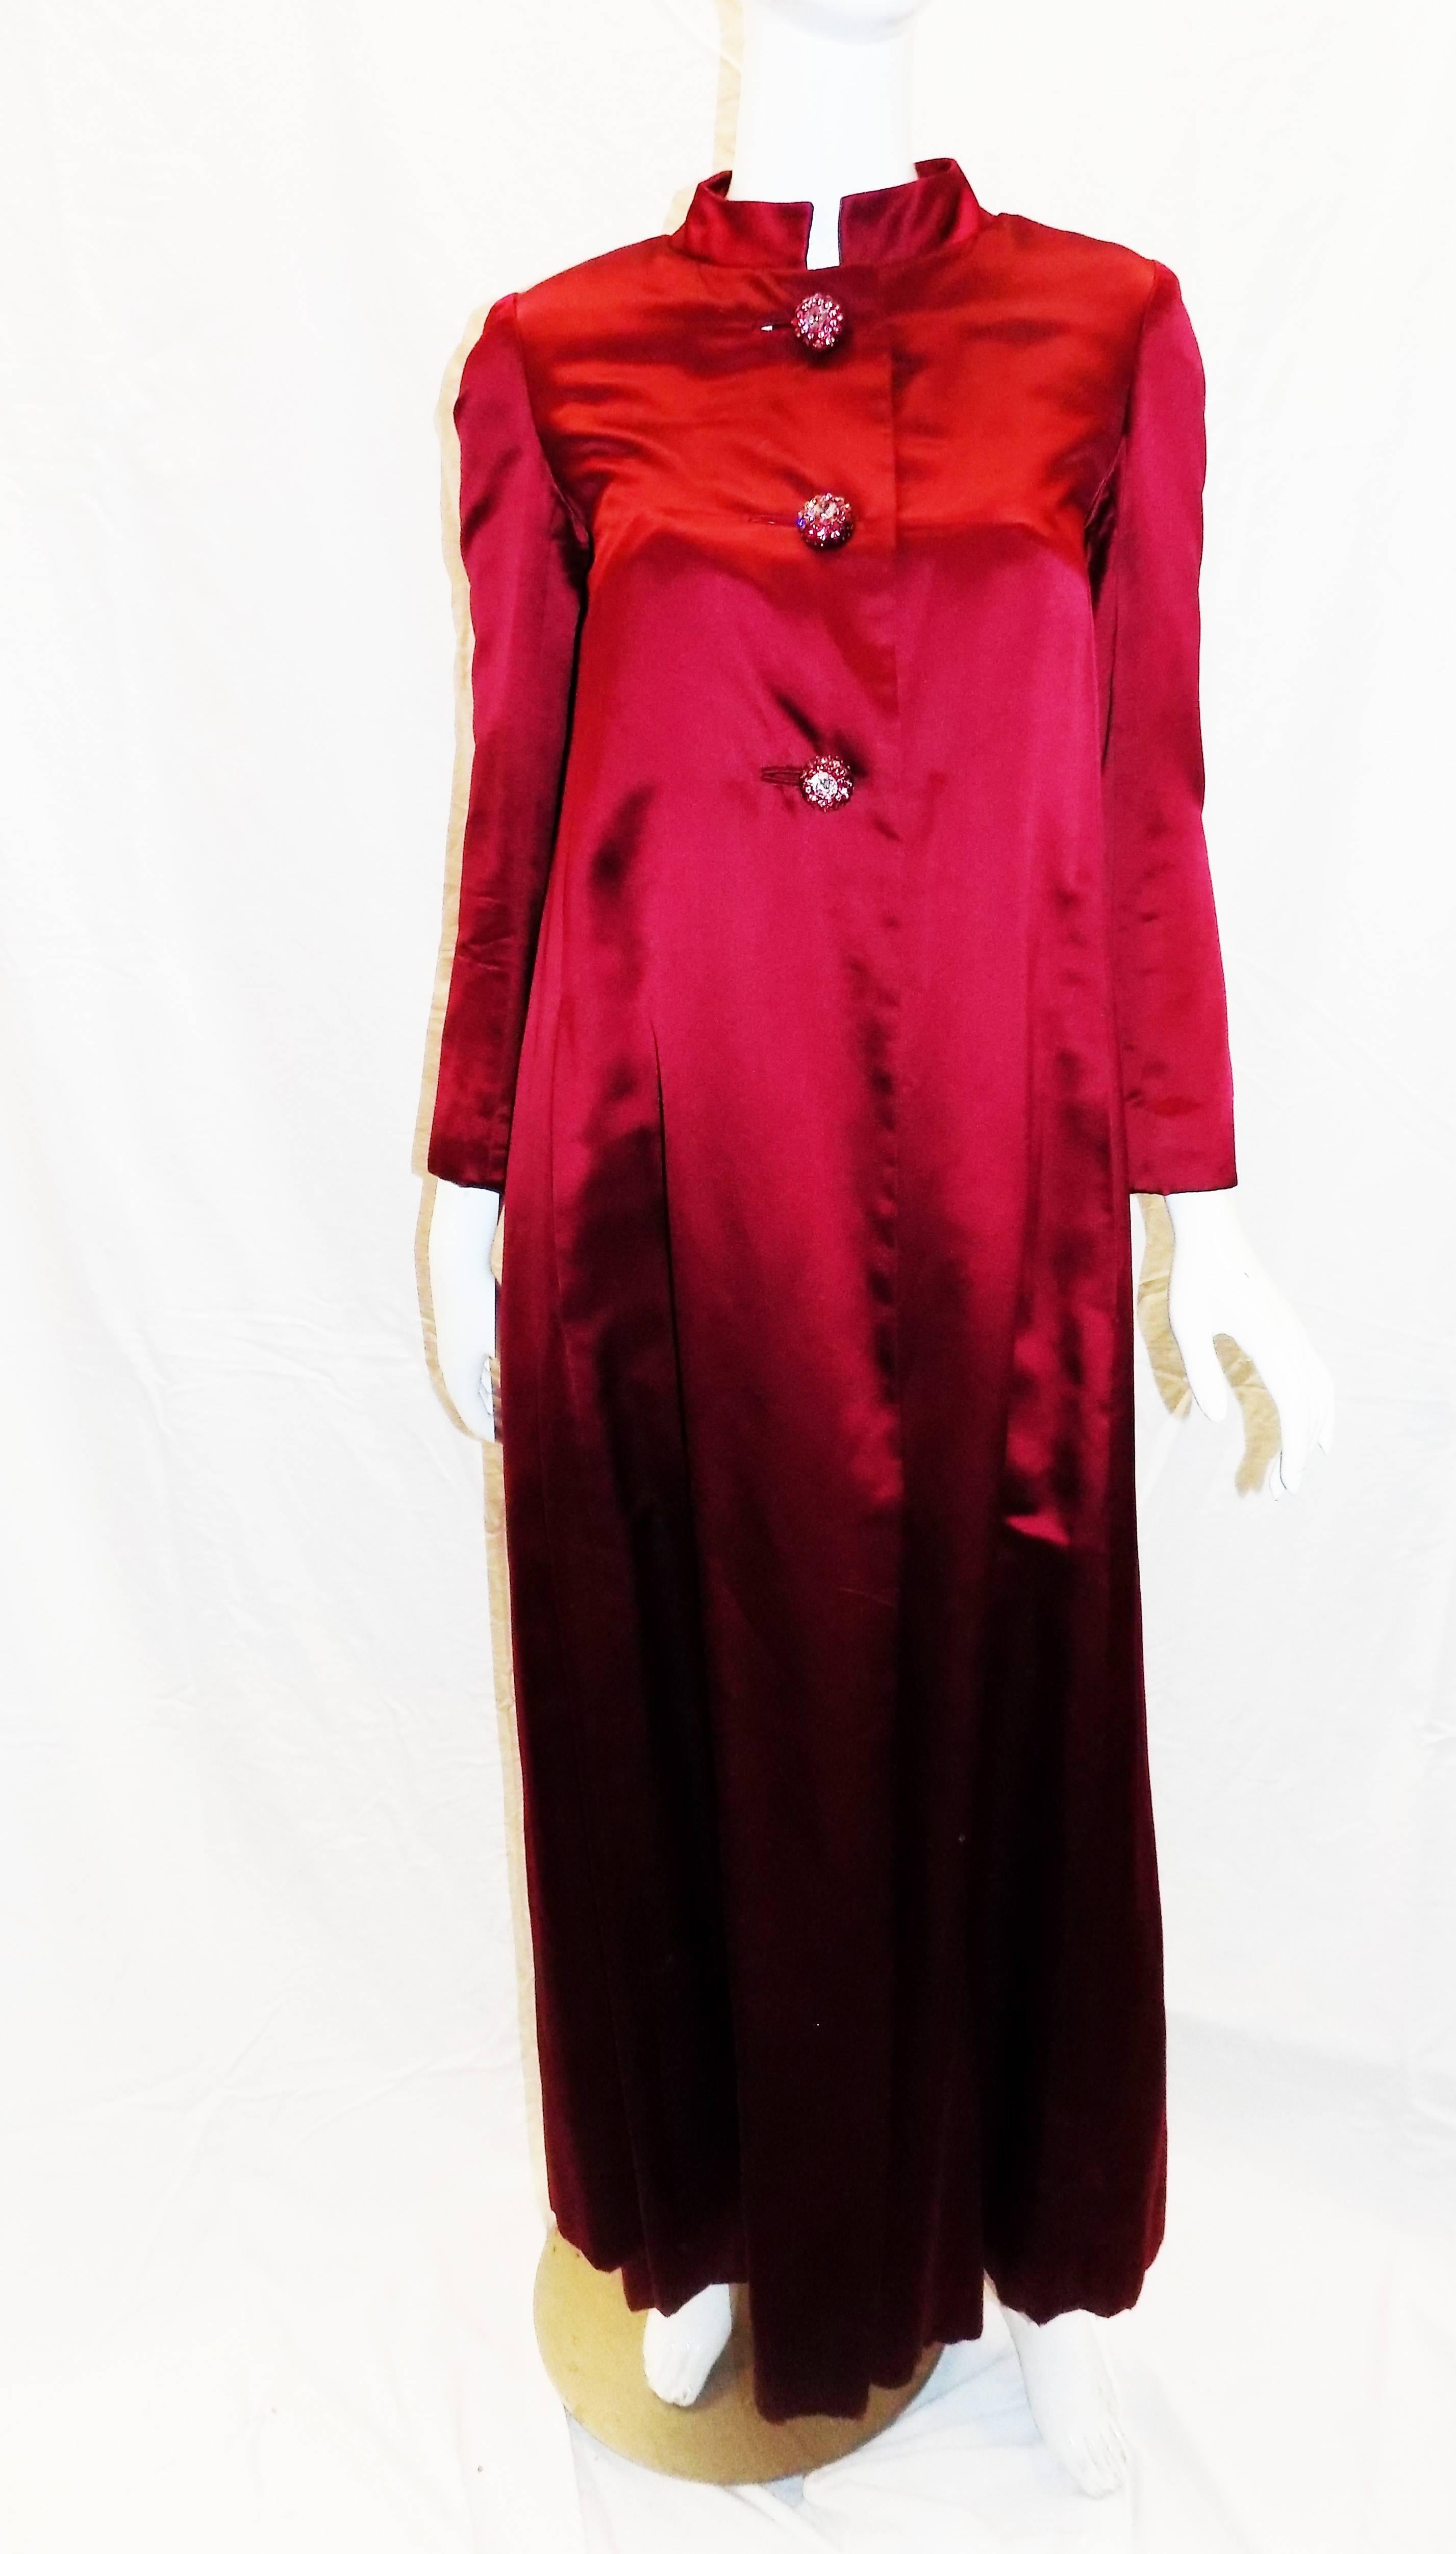 Stunning Malcom Starr floor length burgundy evening coat and beaded dress 1960. Heavy silk duchess coat with Mandarin collar and spectacular hand made large crystal buttons . Under that is matching evening gown with beaded bust line featuring